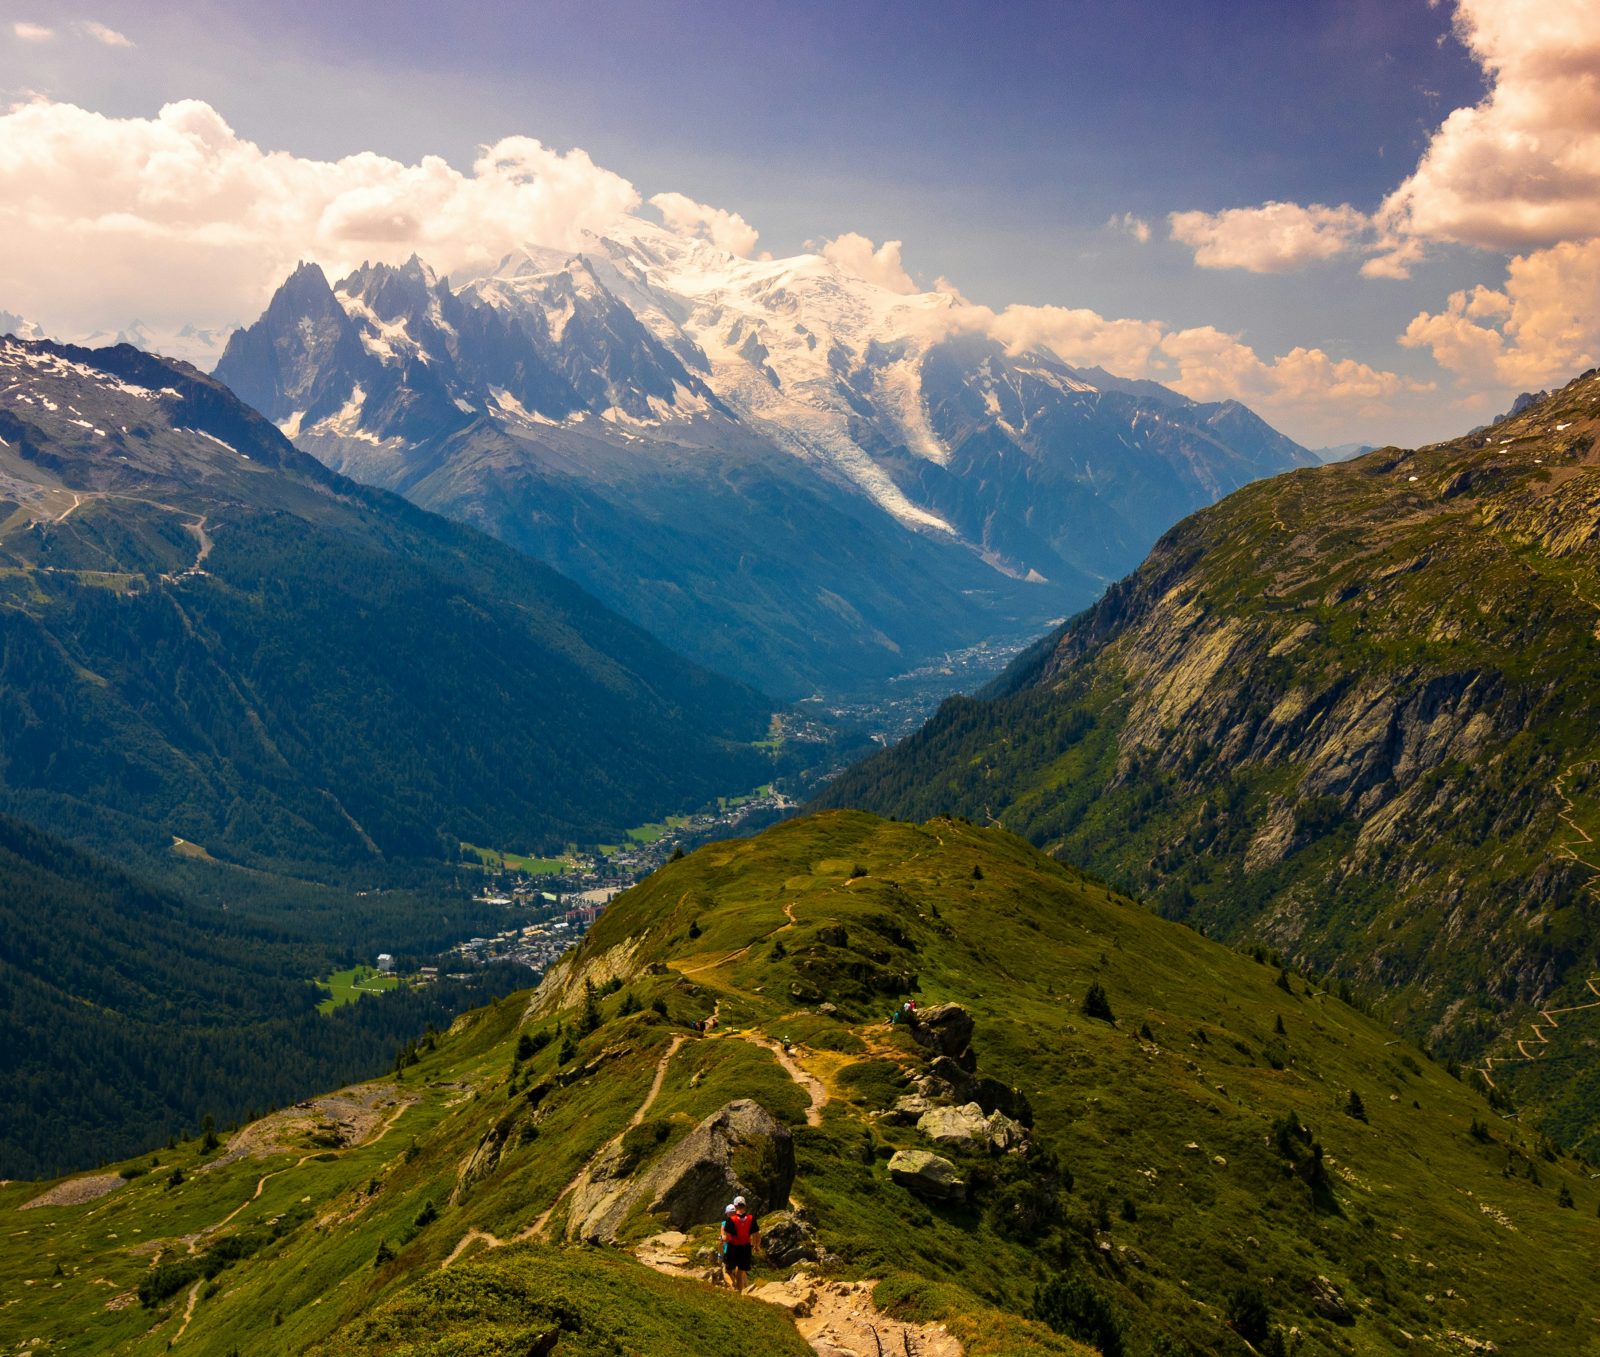 The Alps in the Summer: What Happens in Your Favourite Resorts When the Ski Season is Over?